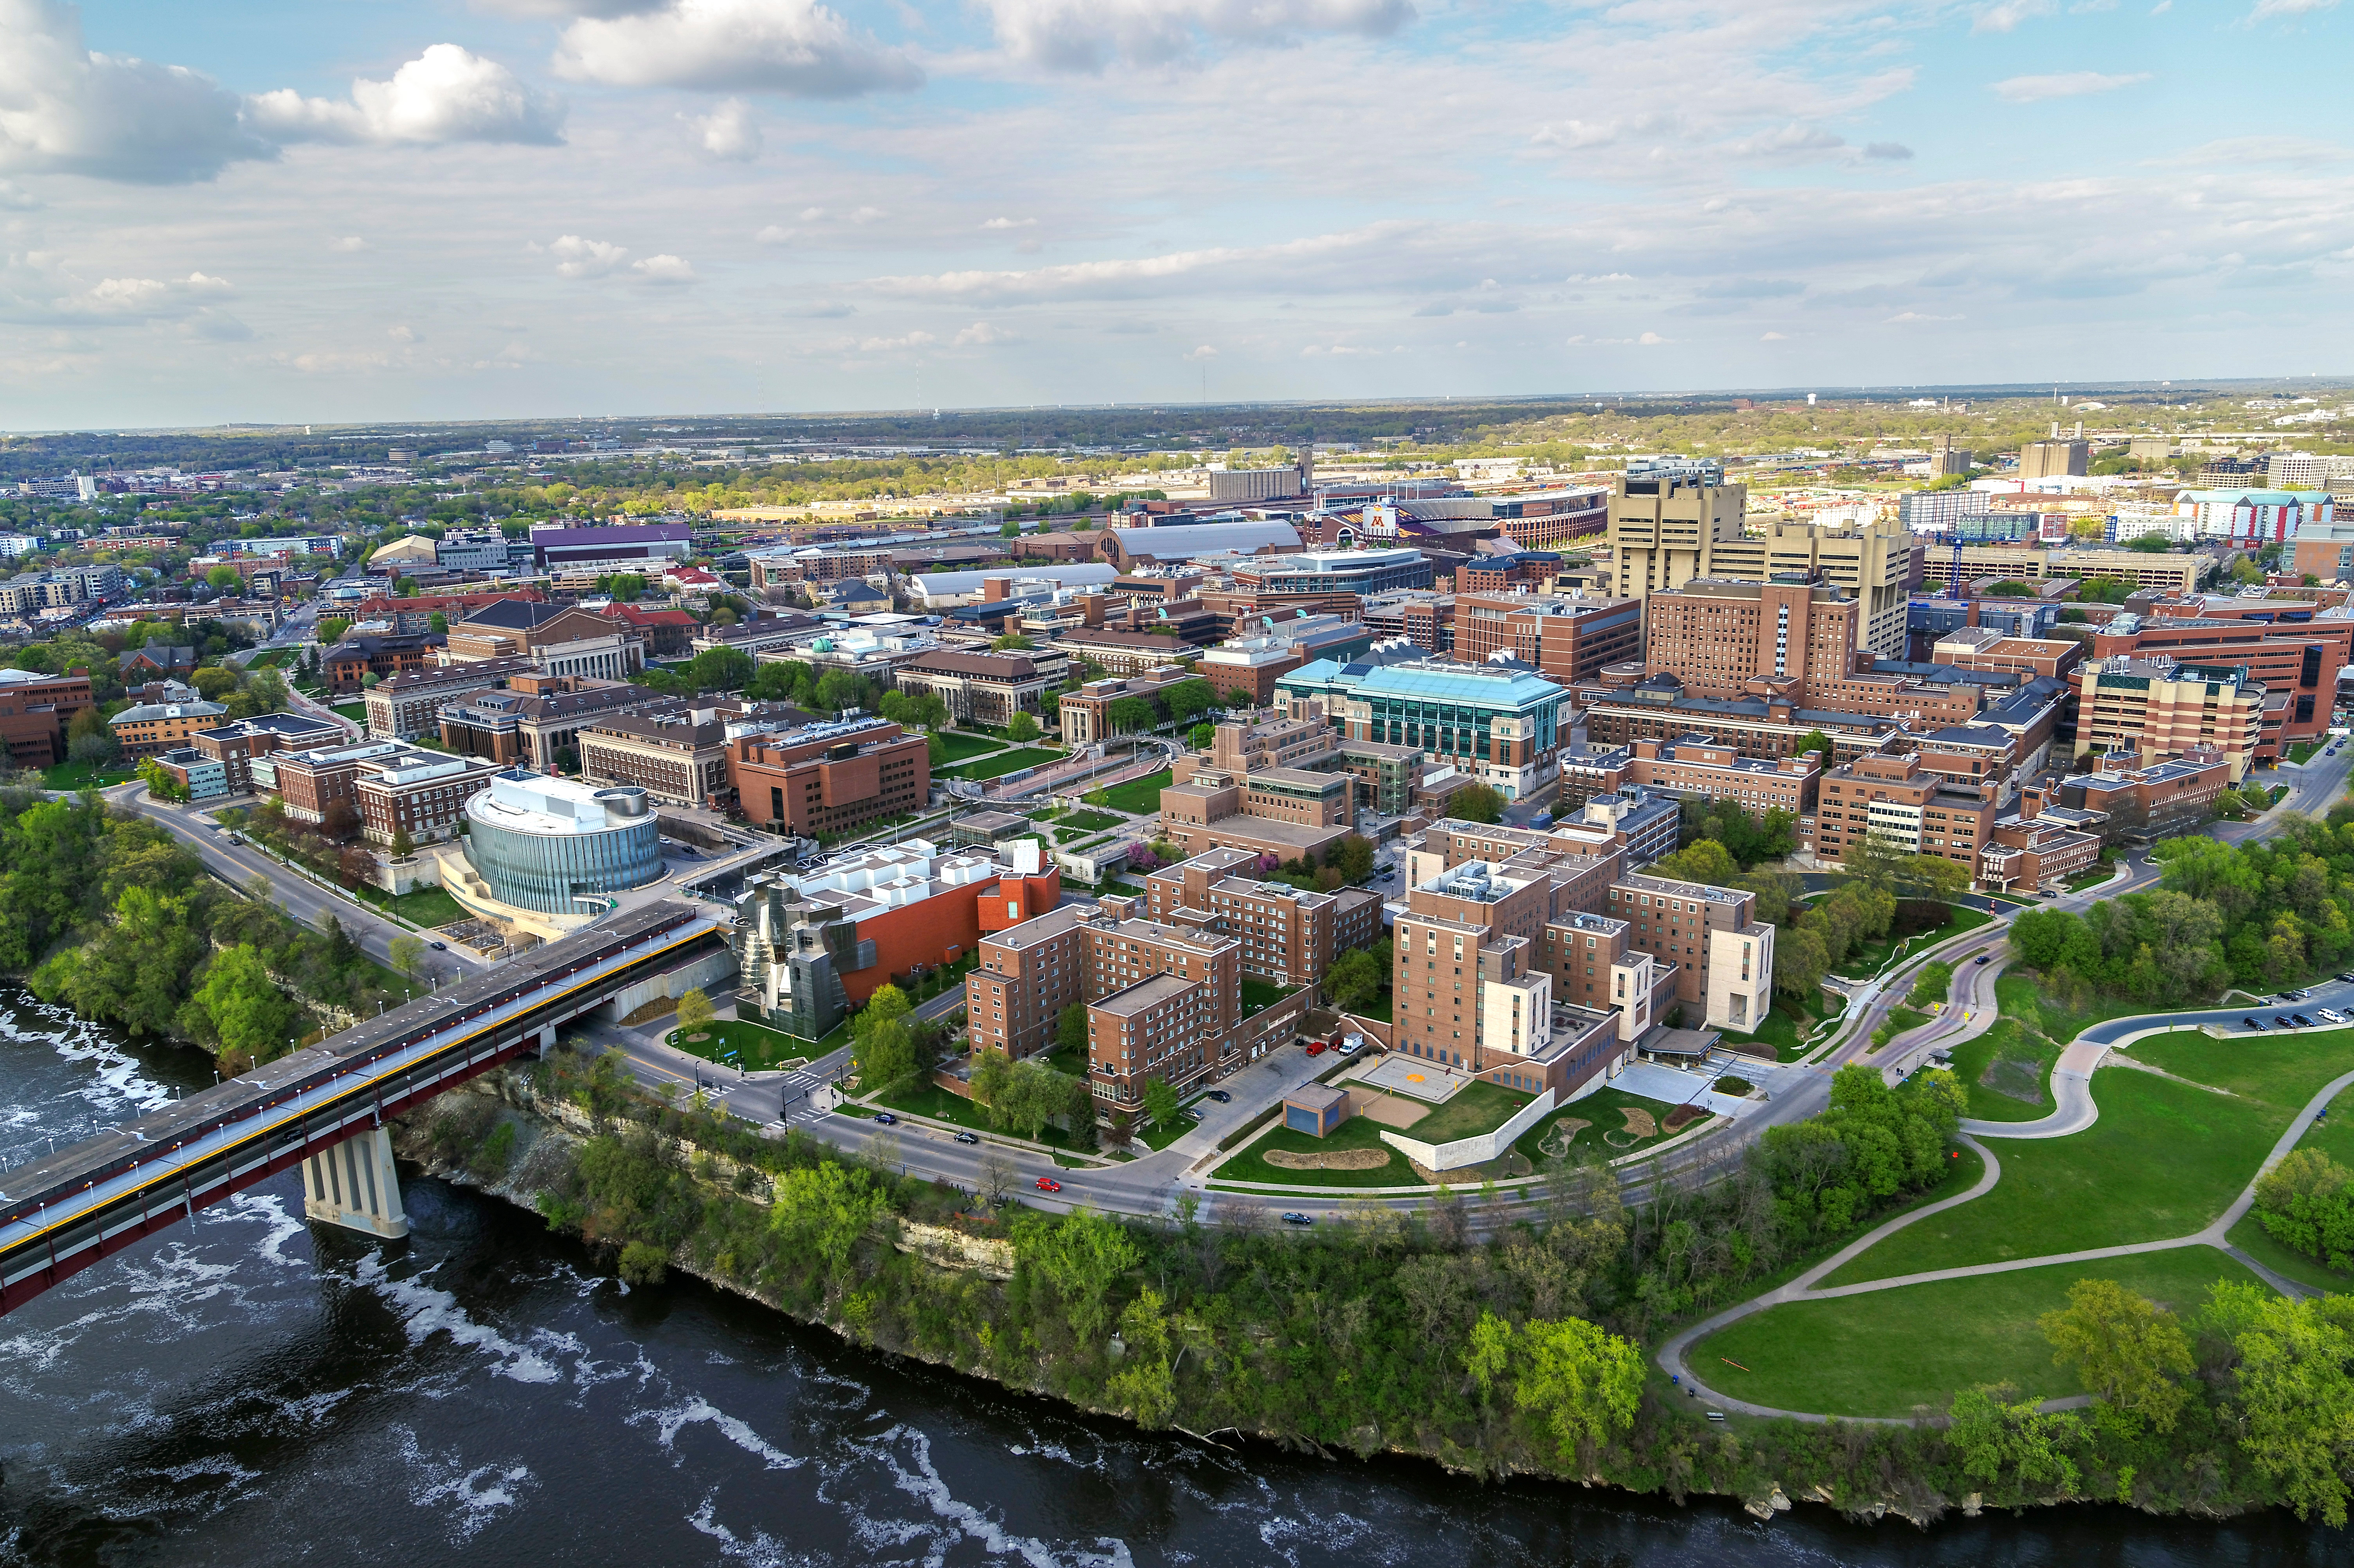 Aerial view of East Bank looking Northeast showing Washington Avenue bridge going over Mississippi River with campus sprawling North and East.